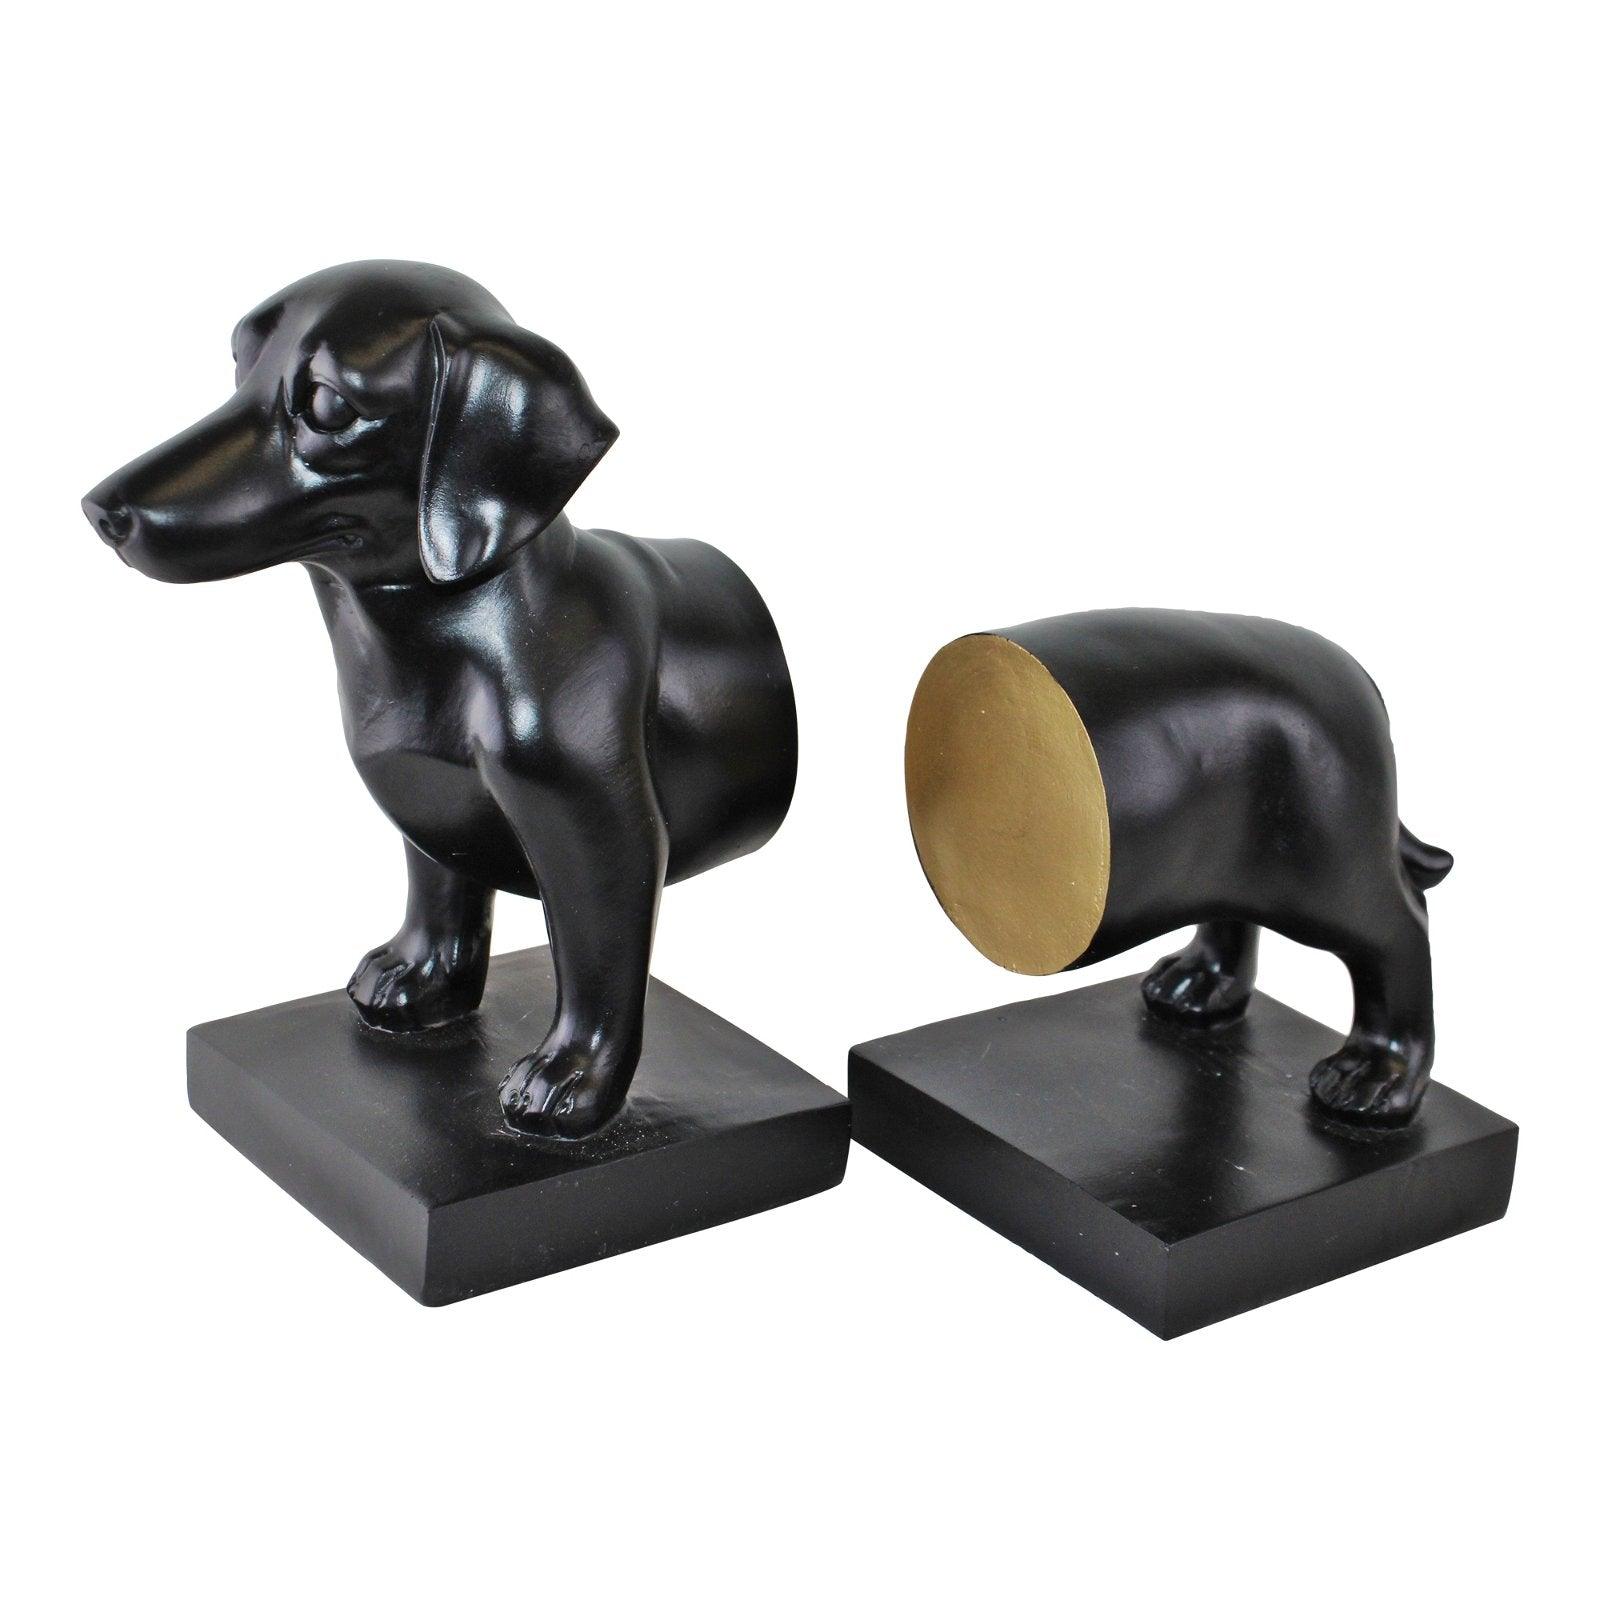 View Sausage Dog Bookends Black Finish information